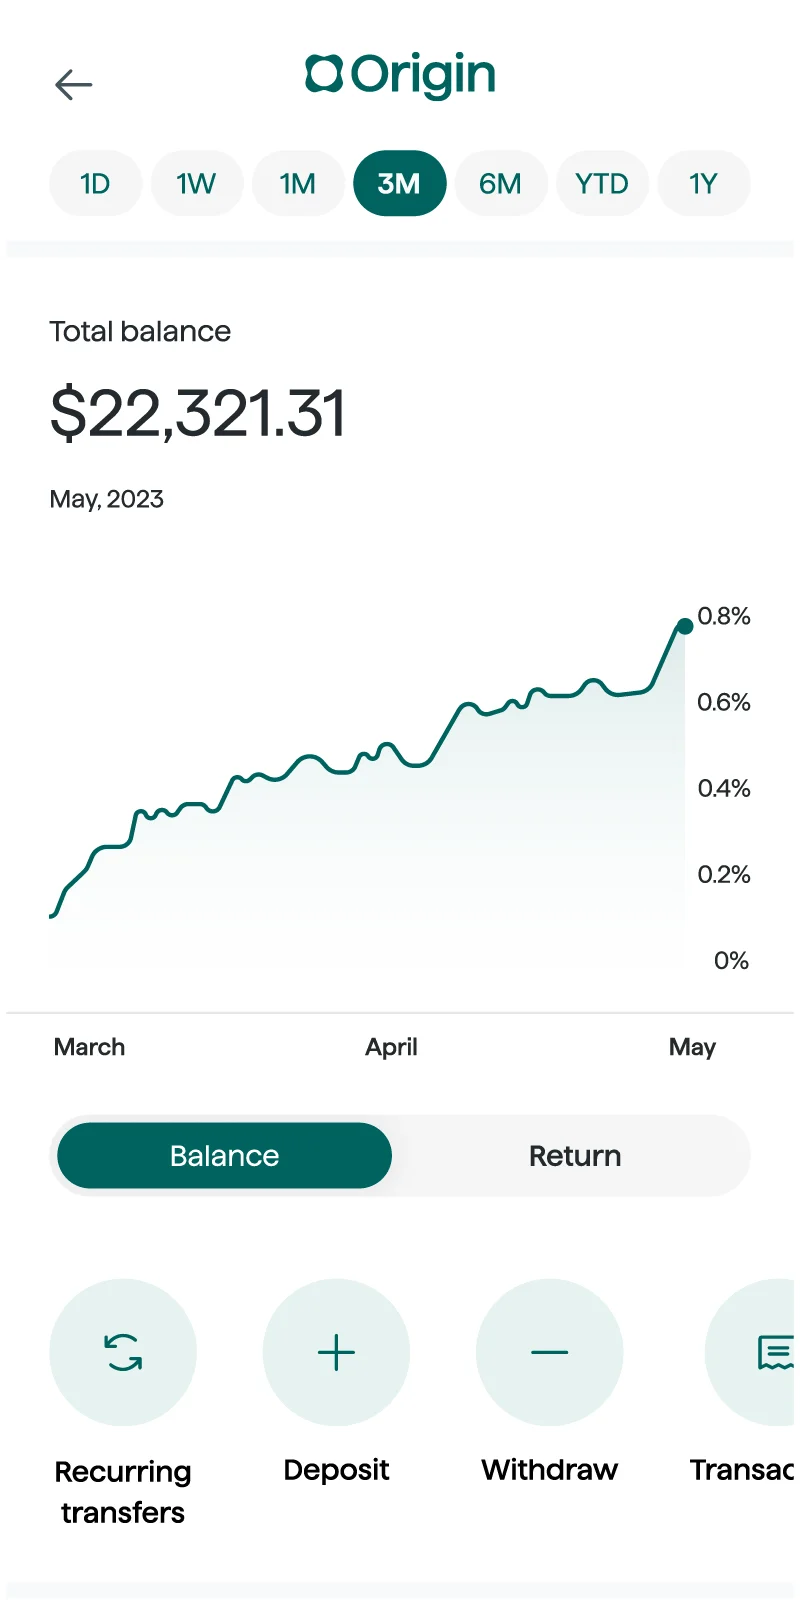 Origin app on investment section showing a total balance of $22,321.31 for May 2023. A line graph illustrates the account balance over time, with a recent uptick indicating a 0.8% return. Time filters such as 1D until 1Y are available. Below the graph, options for 'Balance,' 'Return,' 'Recurring transfers,' 'Deposit,' 'Withdraw,' and 'Transaction' are displayed.